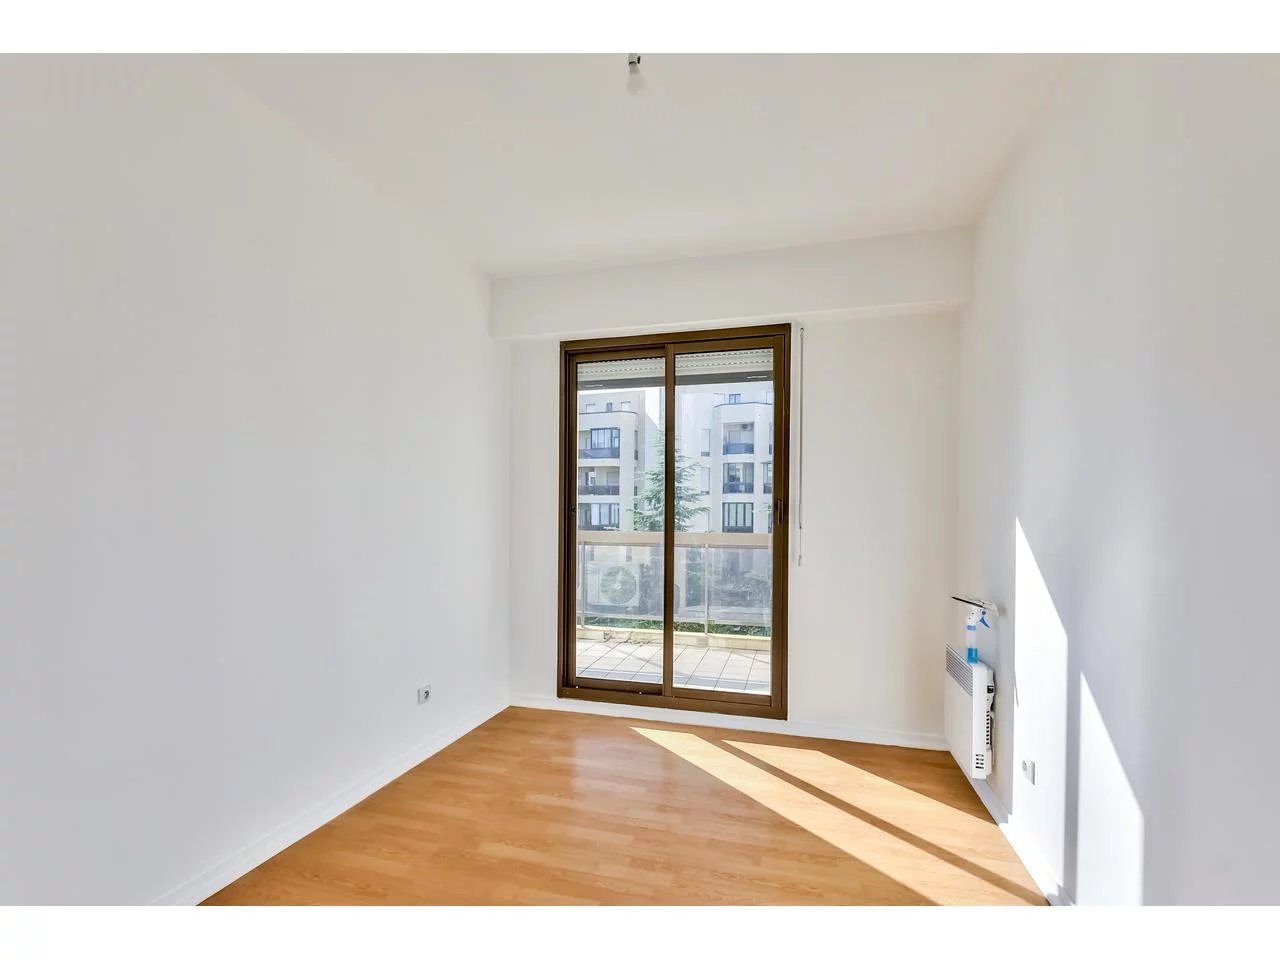 Appartement  4 Rooms 89.68m2  for sale   845 000 €